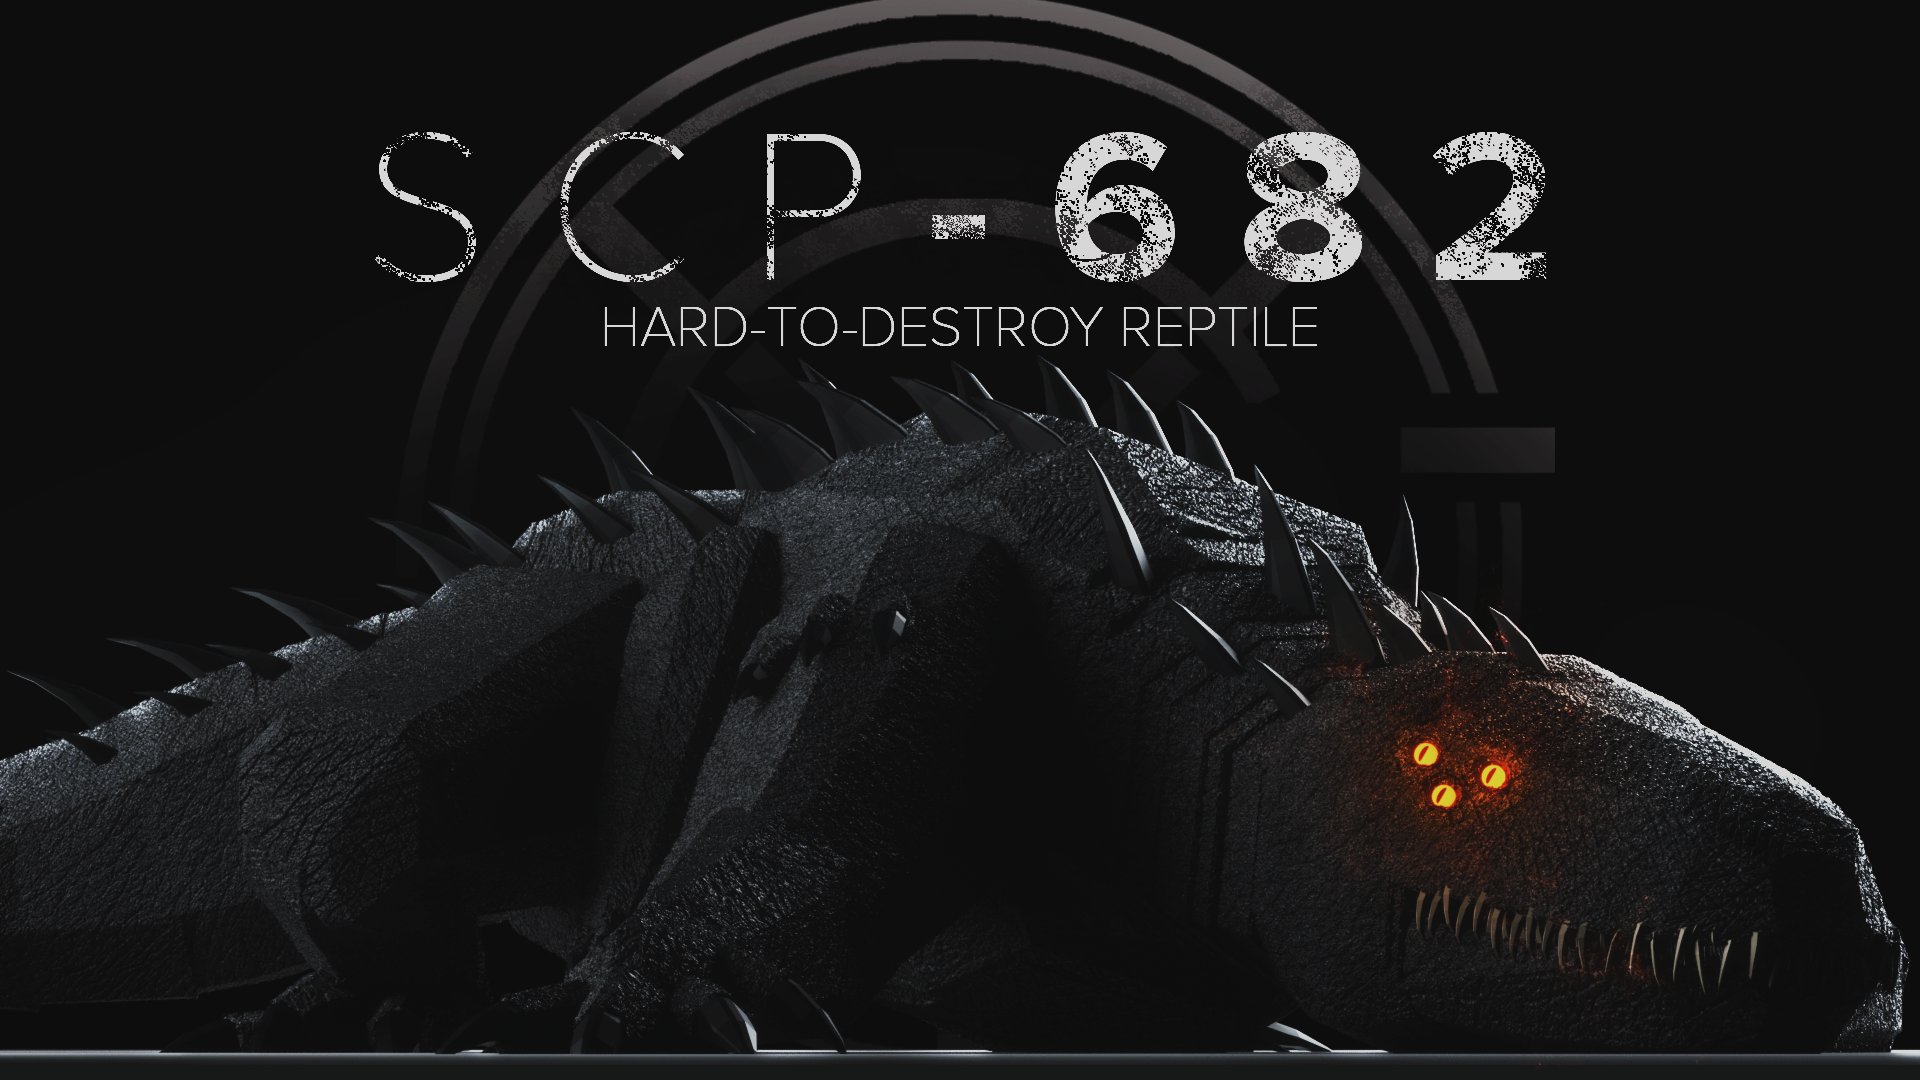 Ch. 4: SCP-682 (The Hard To Destroy Reptile), SCP's and the SCP Foundation